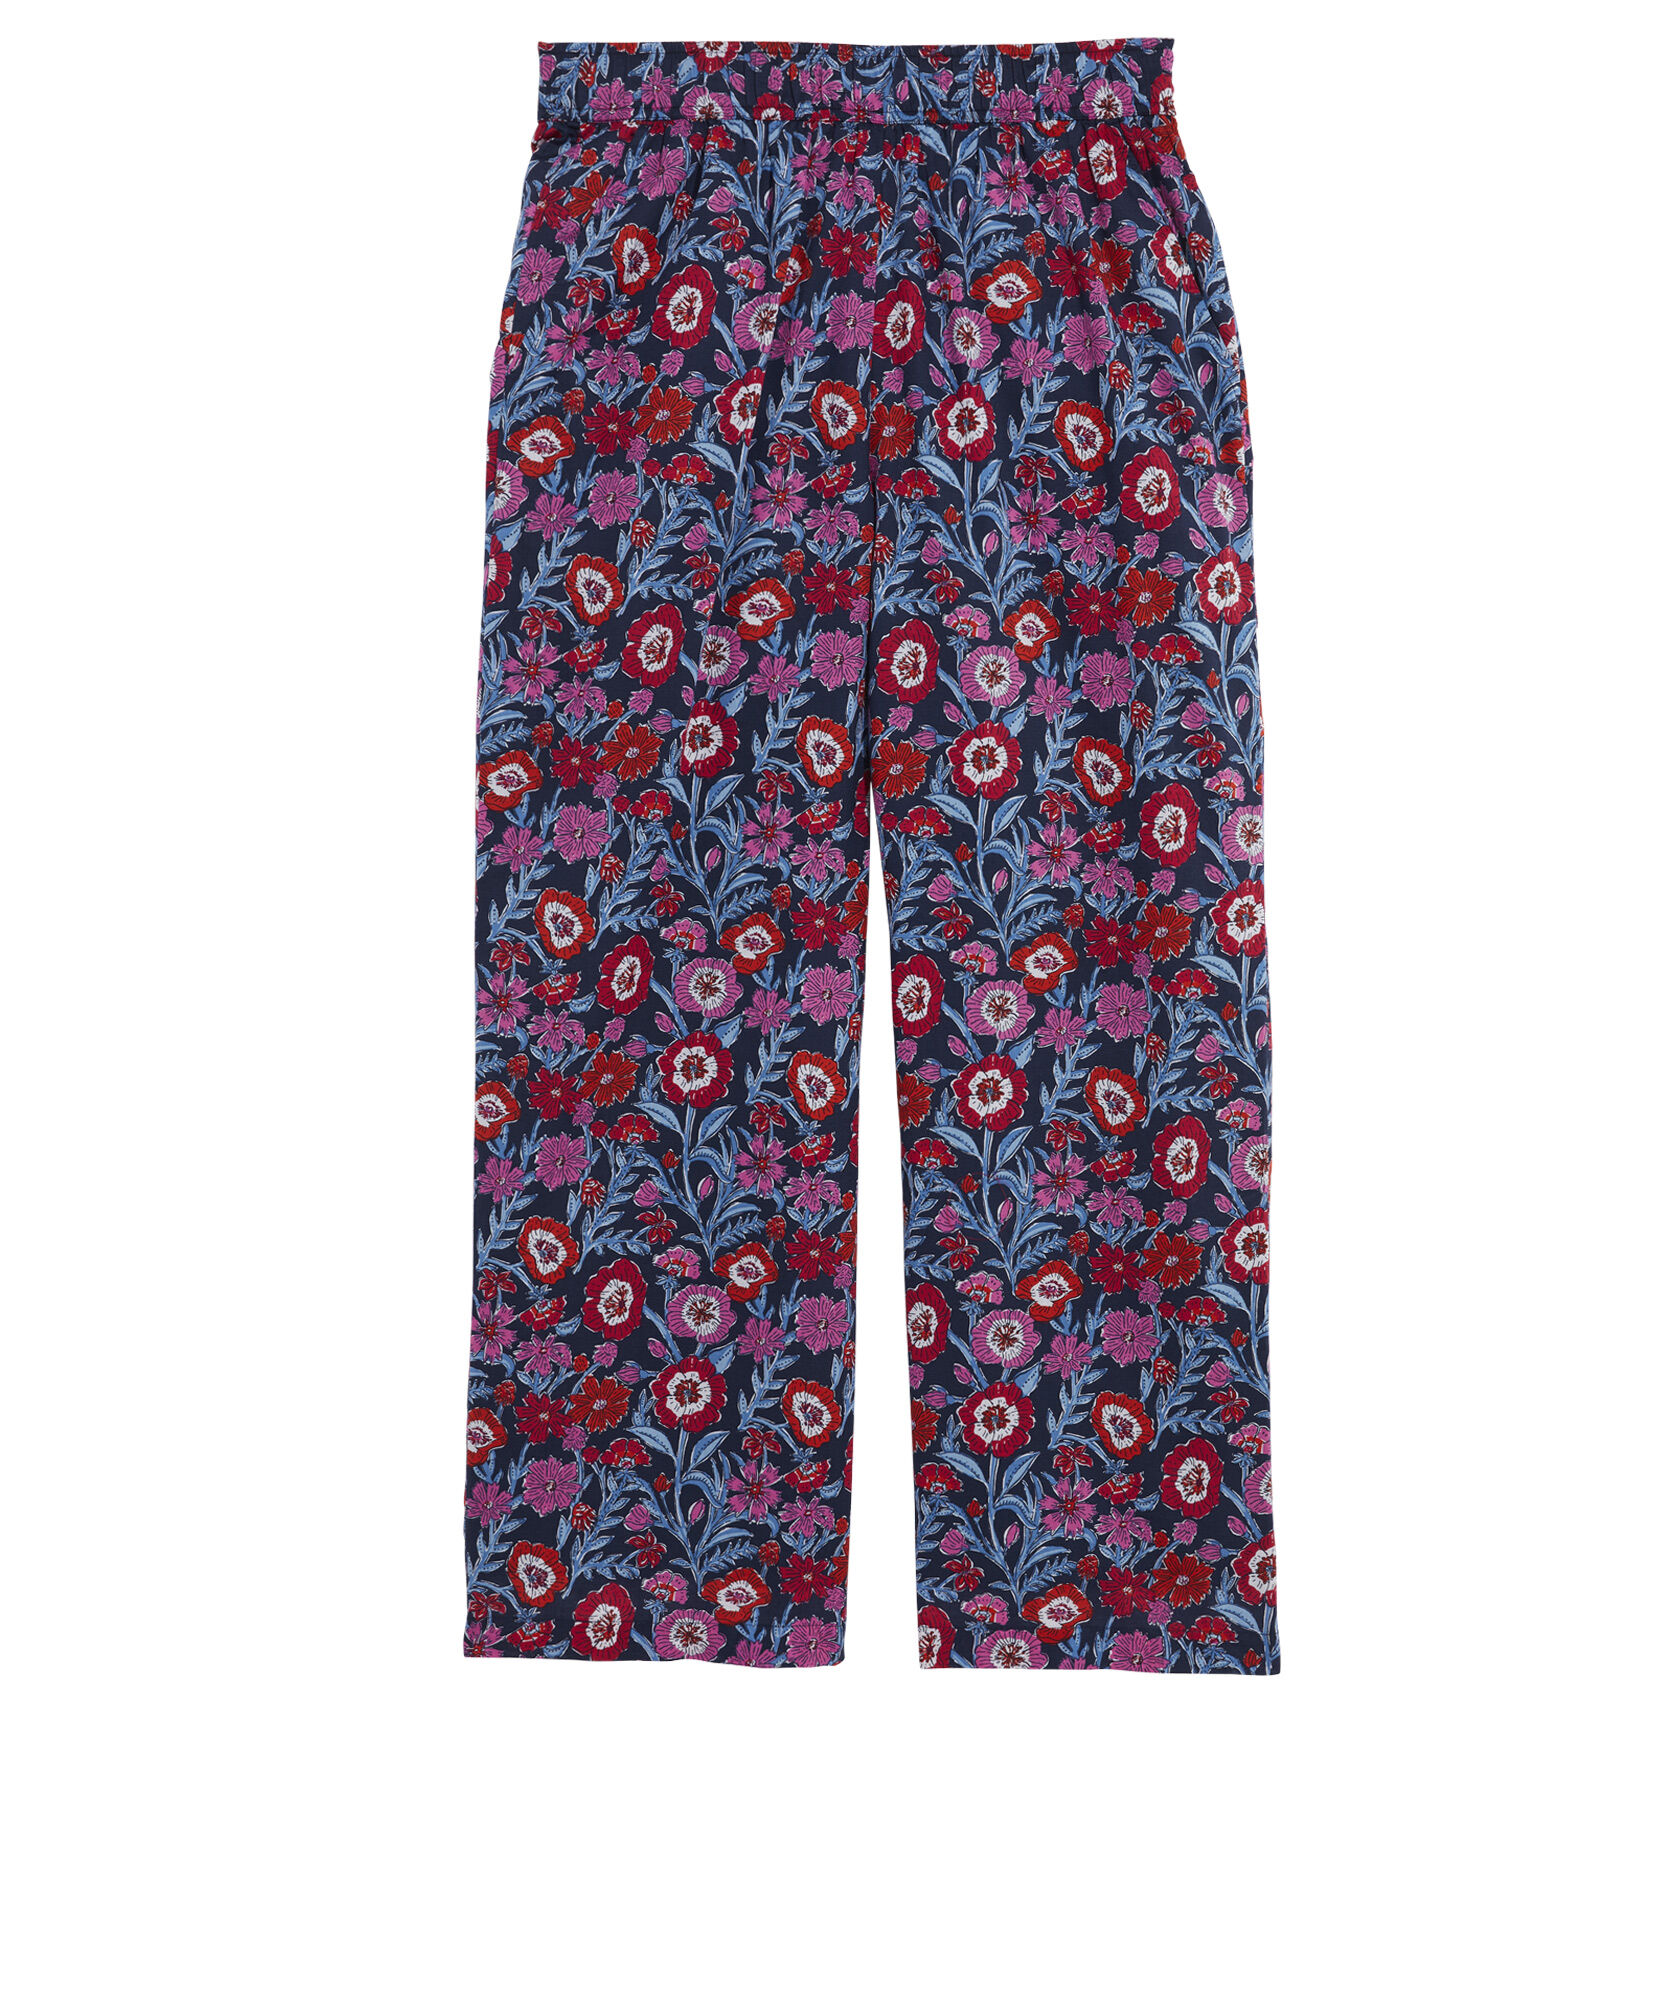 OUTLET Printed Pull-On Pants